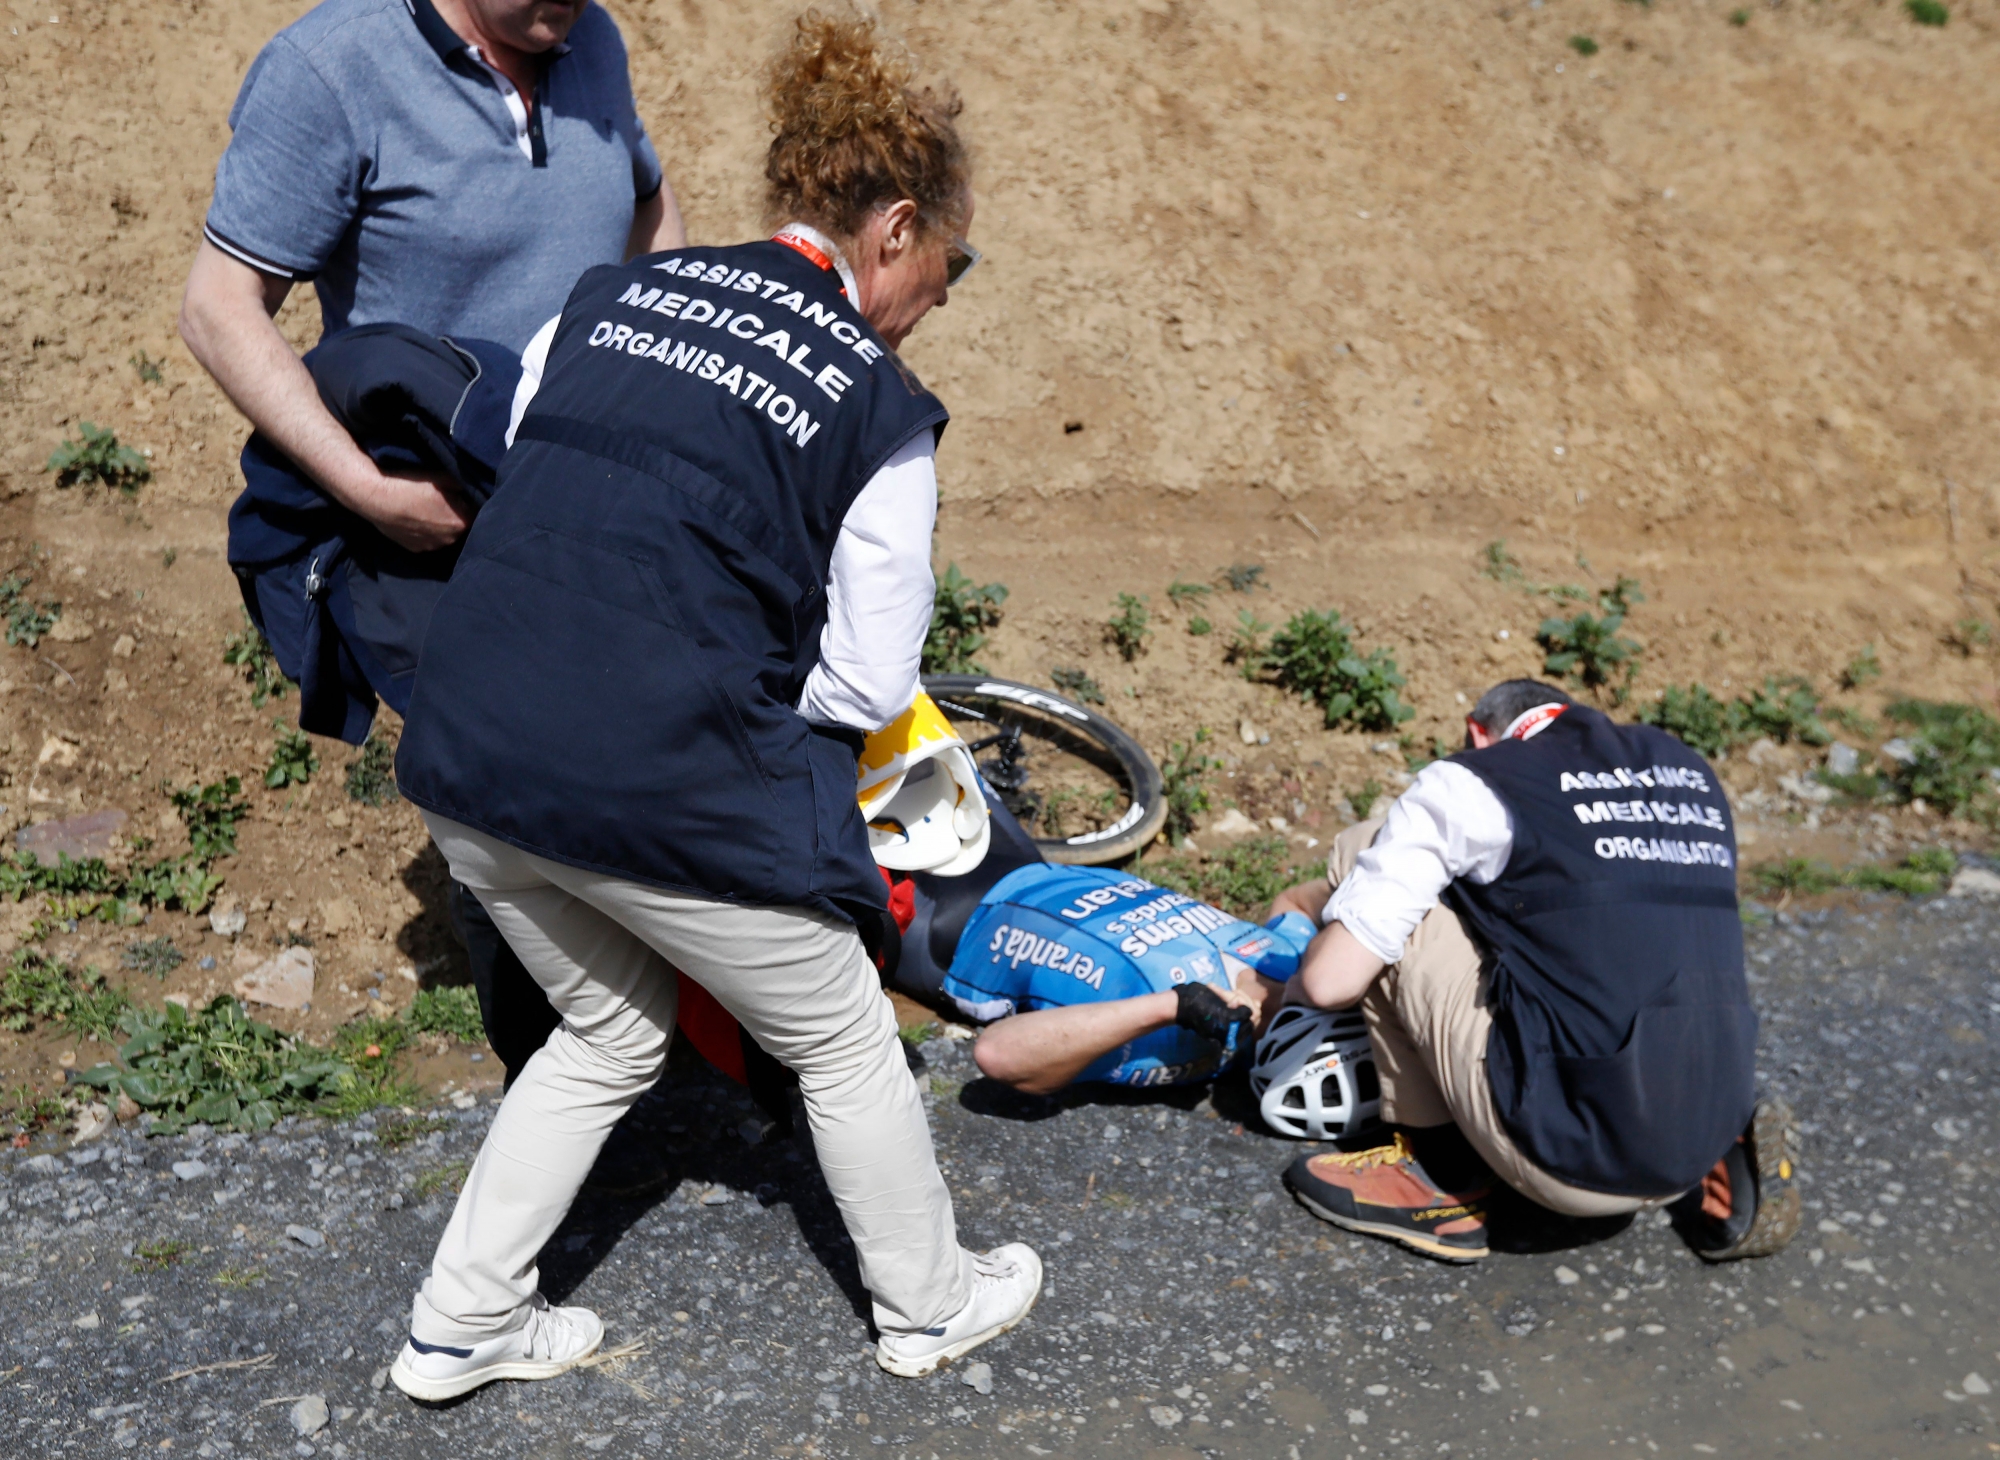 epa06655081 Veranda's Willems team rider Michael Goolaerts of Belgium is attended to by medics after allegedly suffering a cardiac arrest following a crash during the 116th Paris Roubaix cycling race, France, 08 April 2018.  EPA/ETIENNE LAURENT FRANCE CYCLING PARIS ROUBAIX